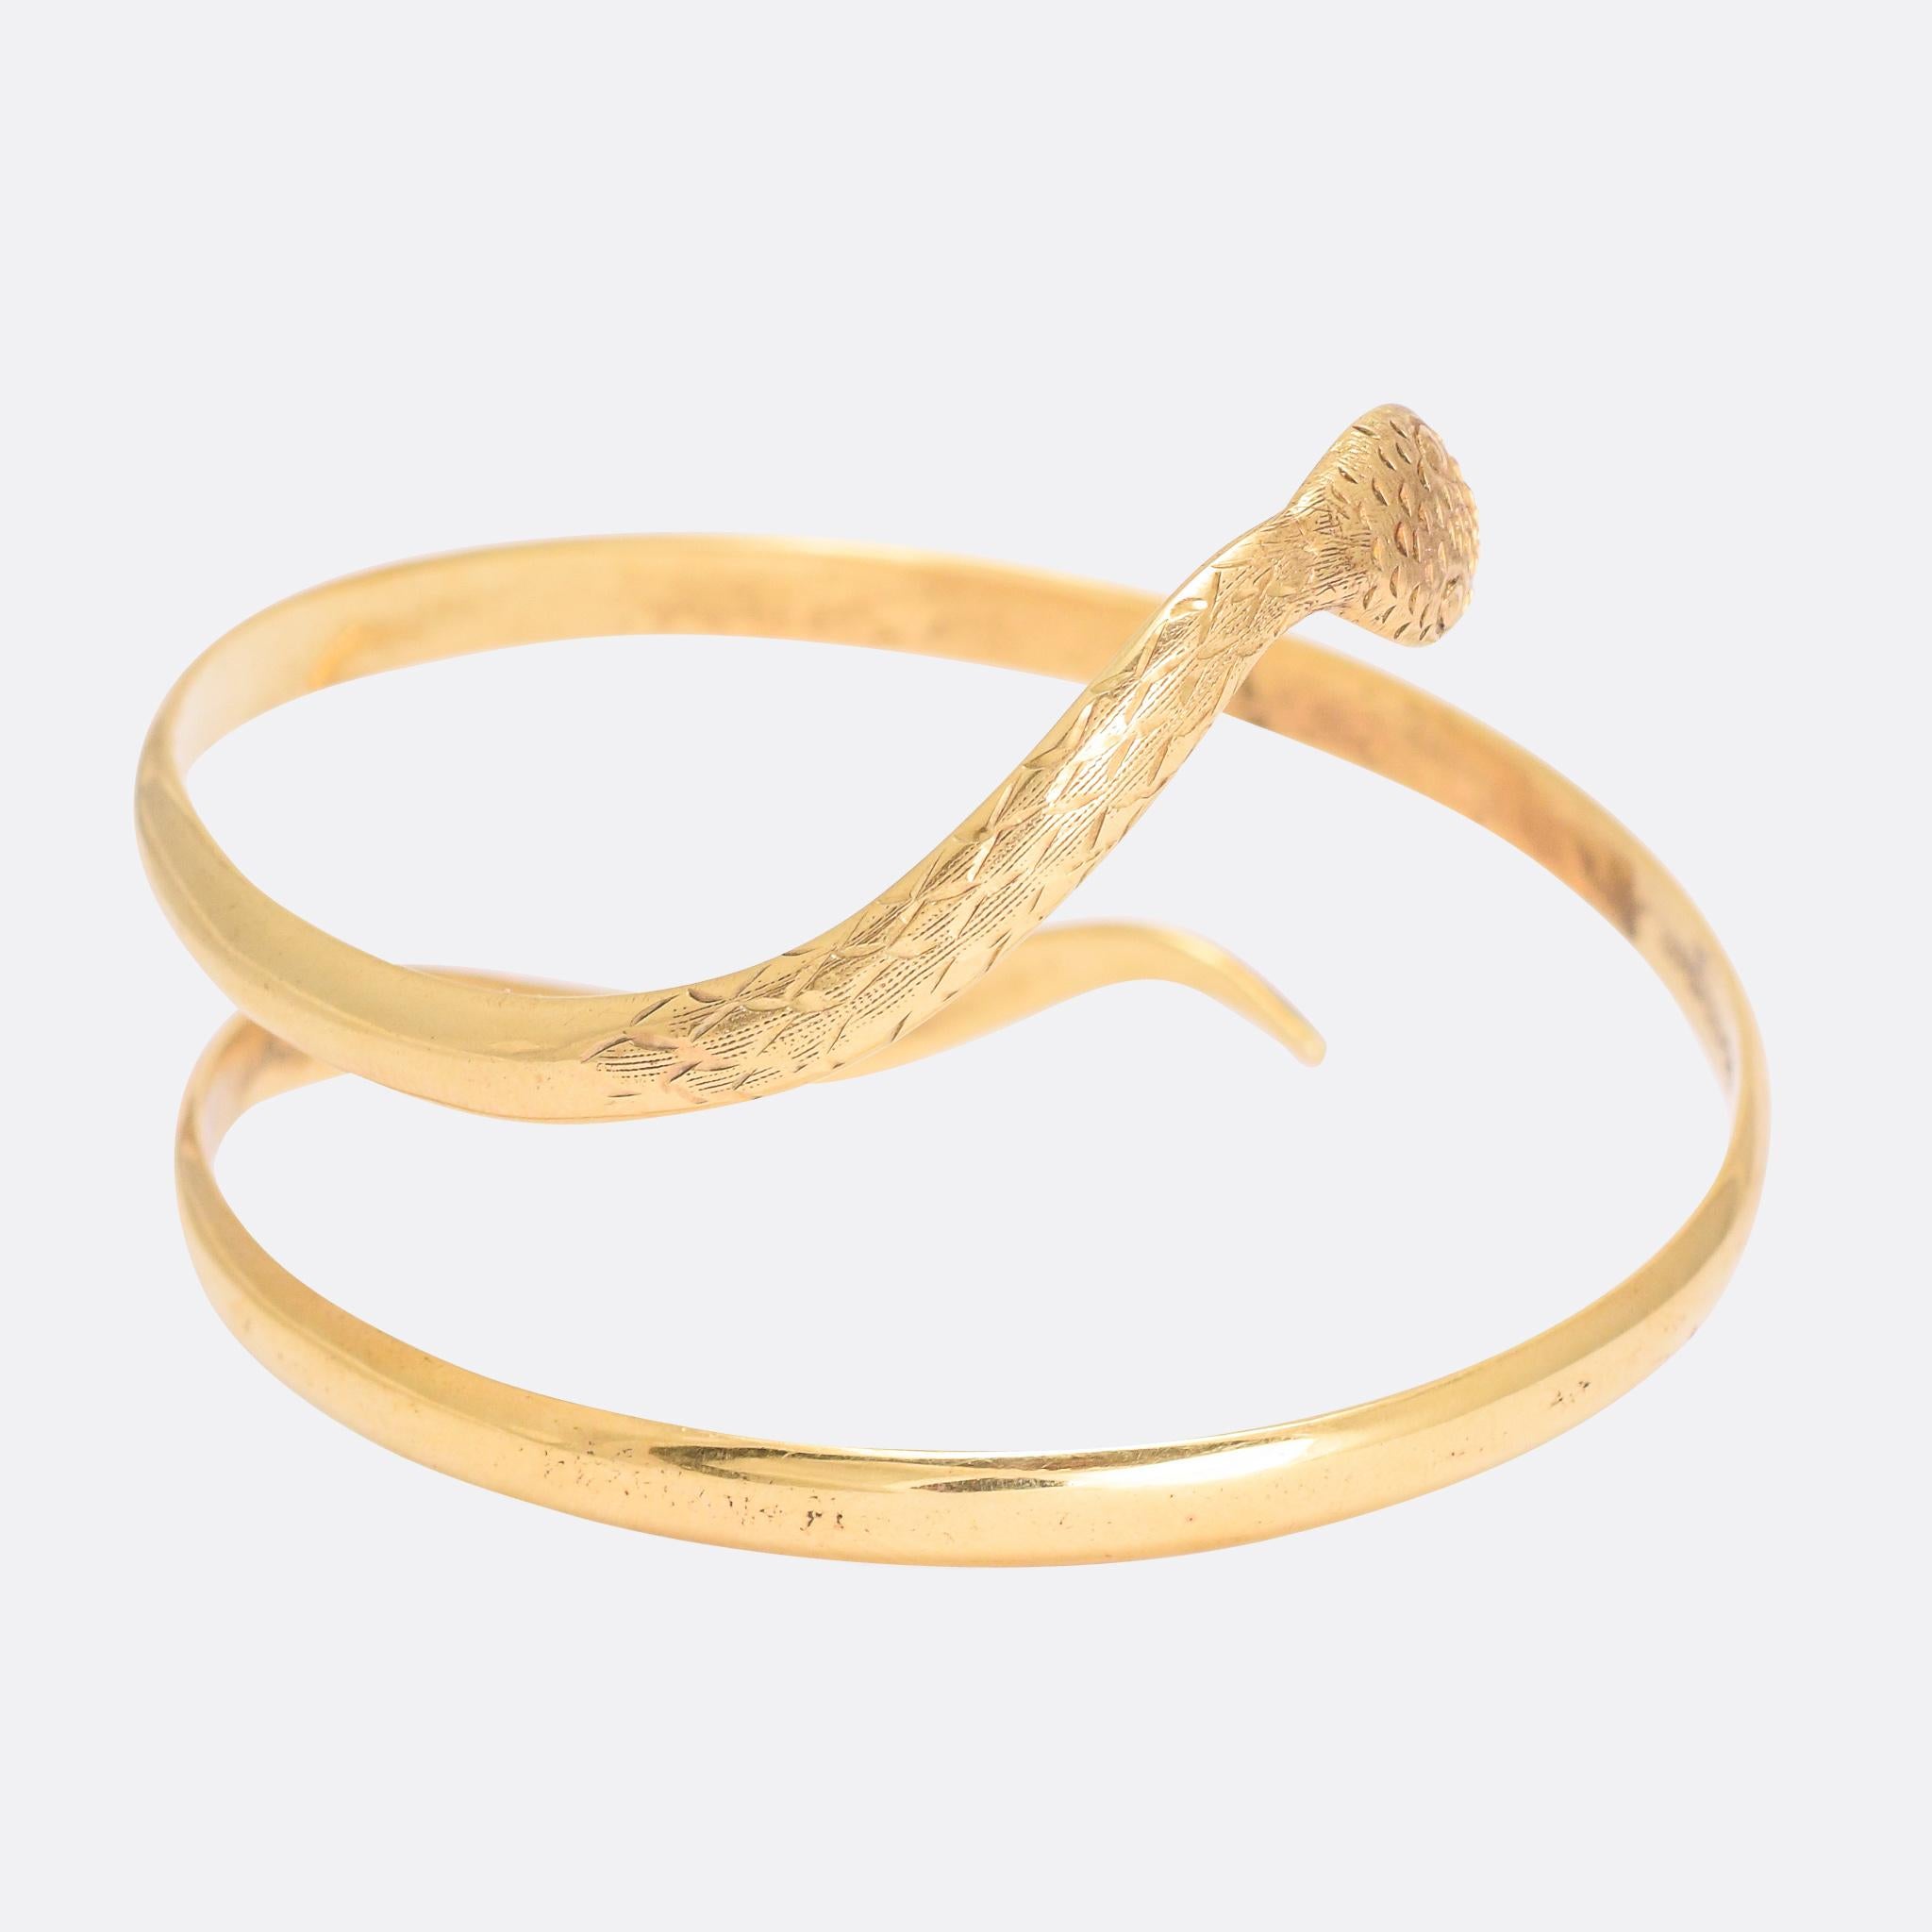 A cool Victorian coiled snake bangle in 9k gold. It dates from the late 19th Century, circa 1880, with hand-chased detailing to the head and neck. It's a good quality, substantial piece, and remains in great condition nearly 150 years